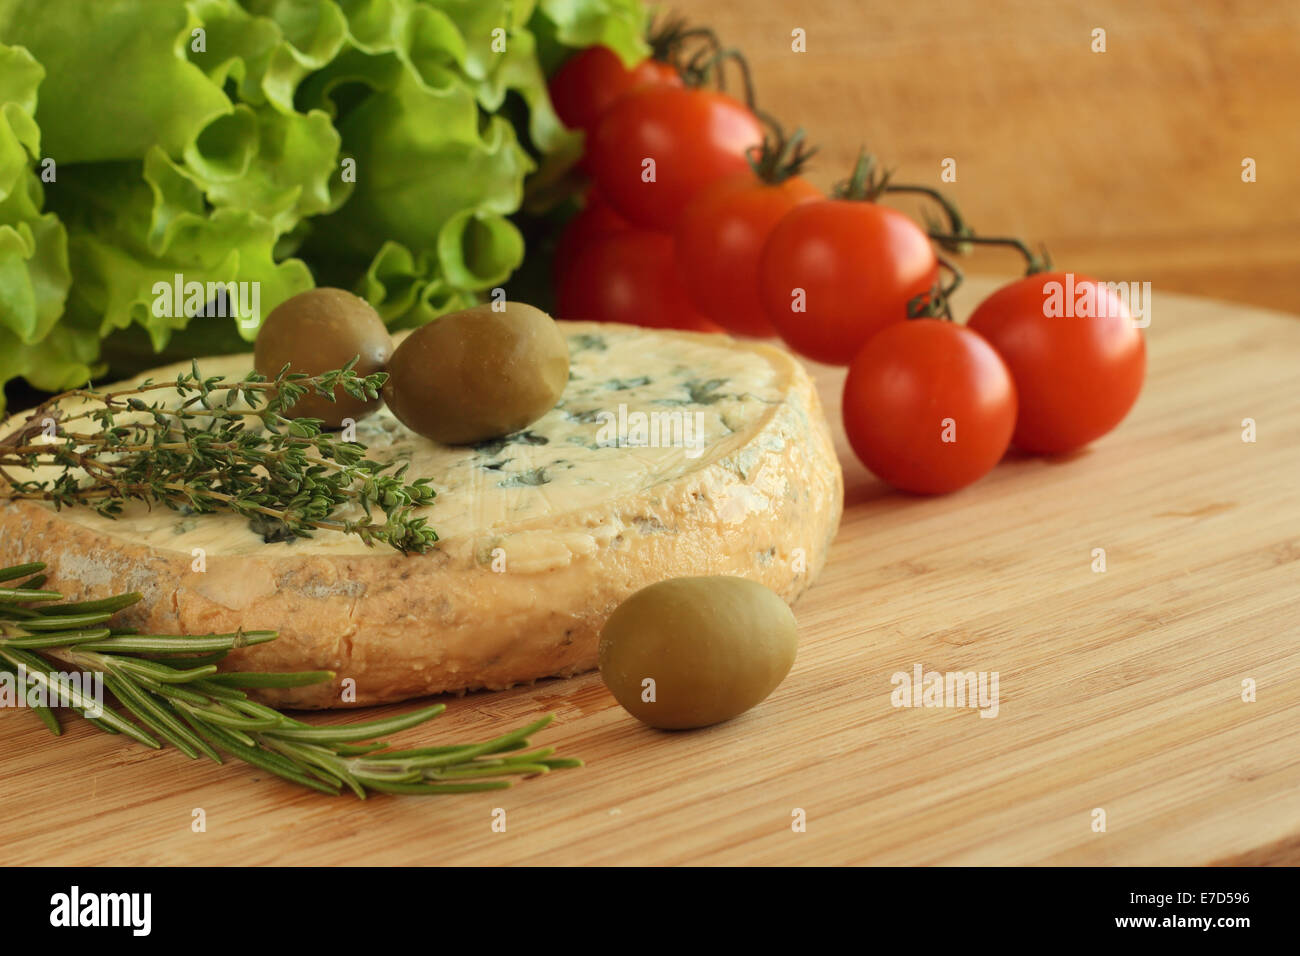 Cheese and Olives composition on wooden table Stock Photo